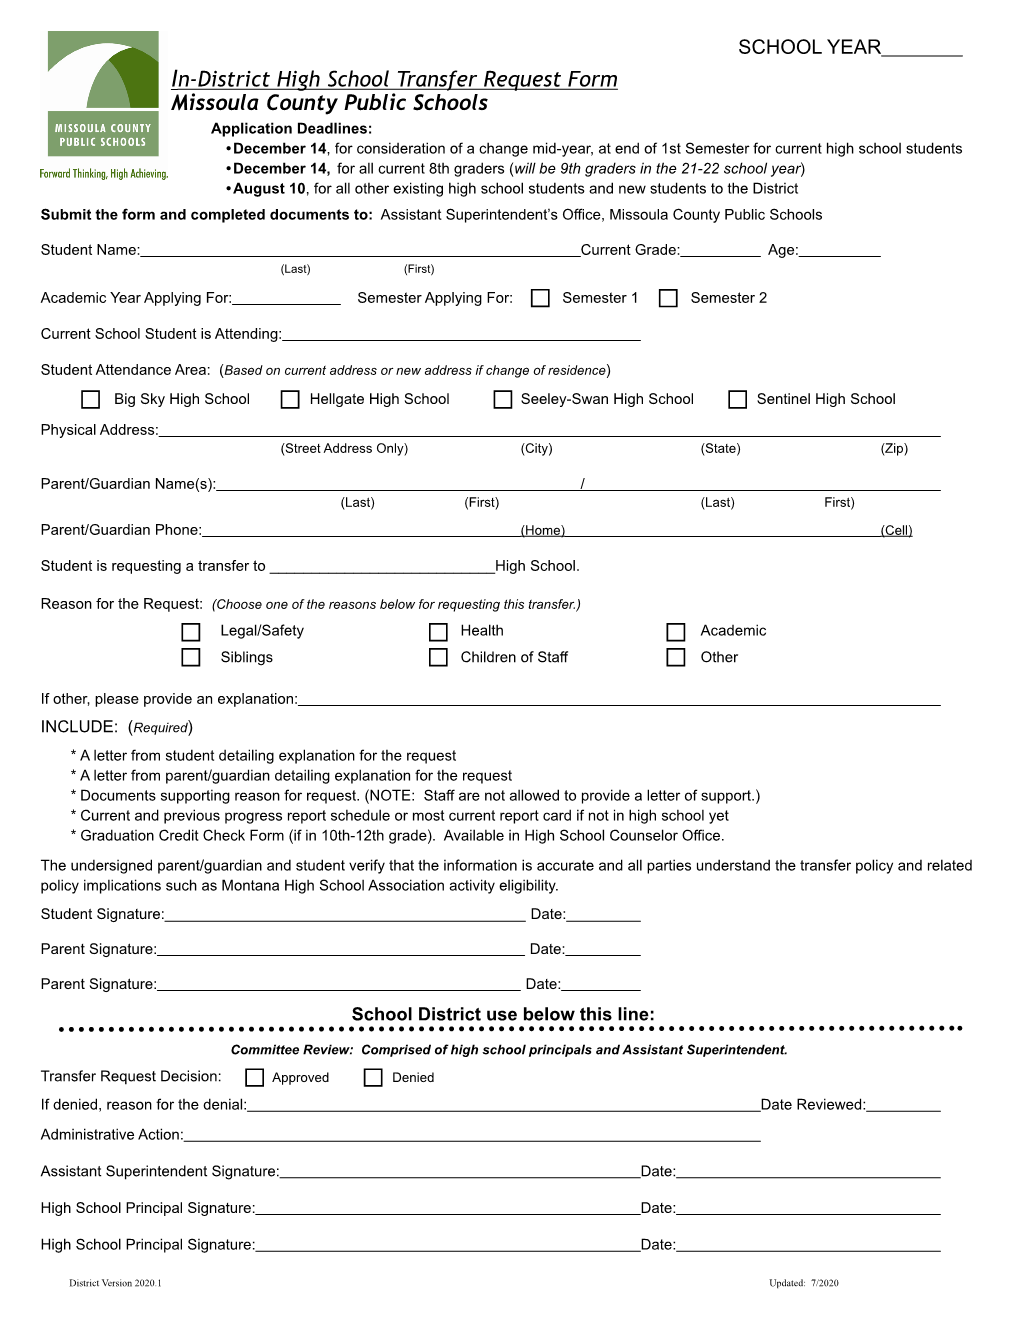 In-District High School Transfer Request Form